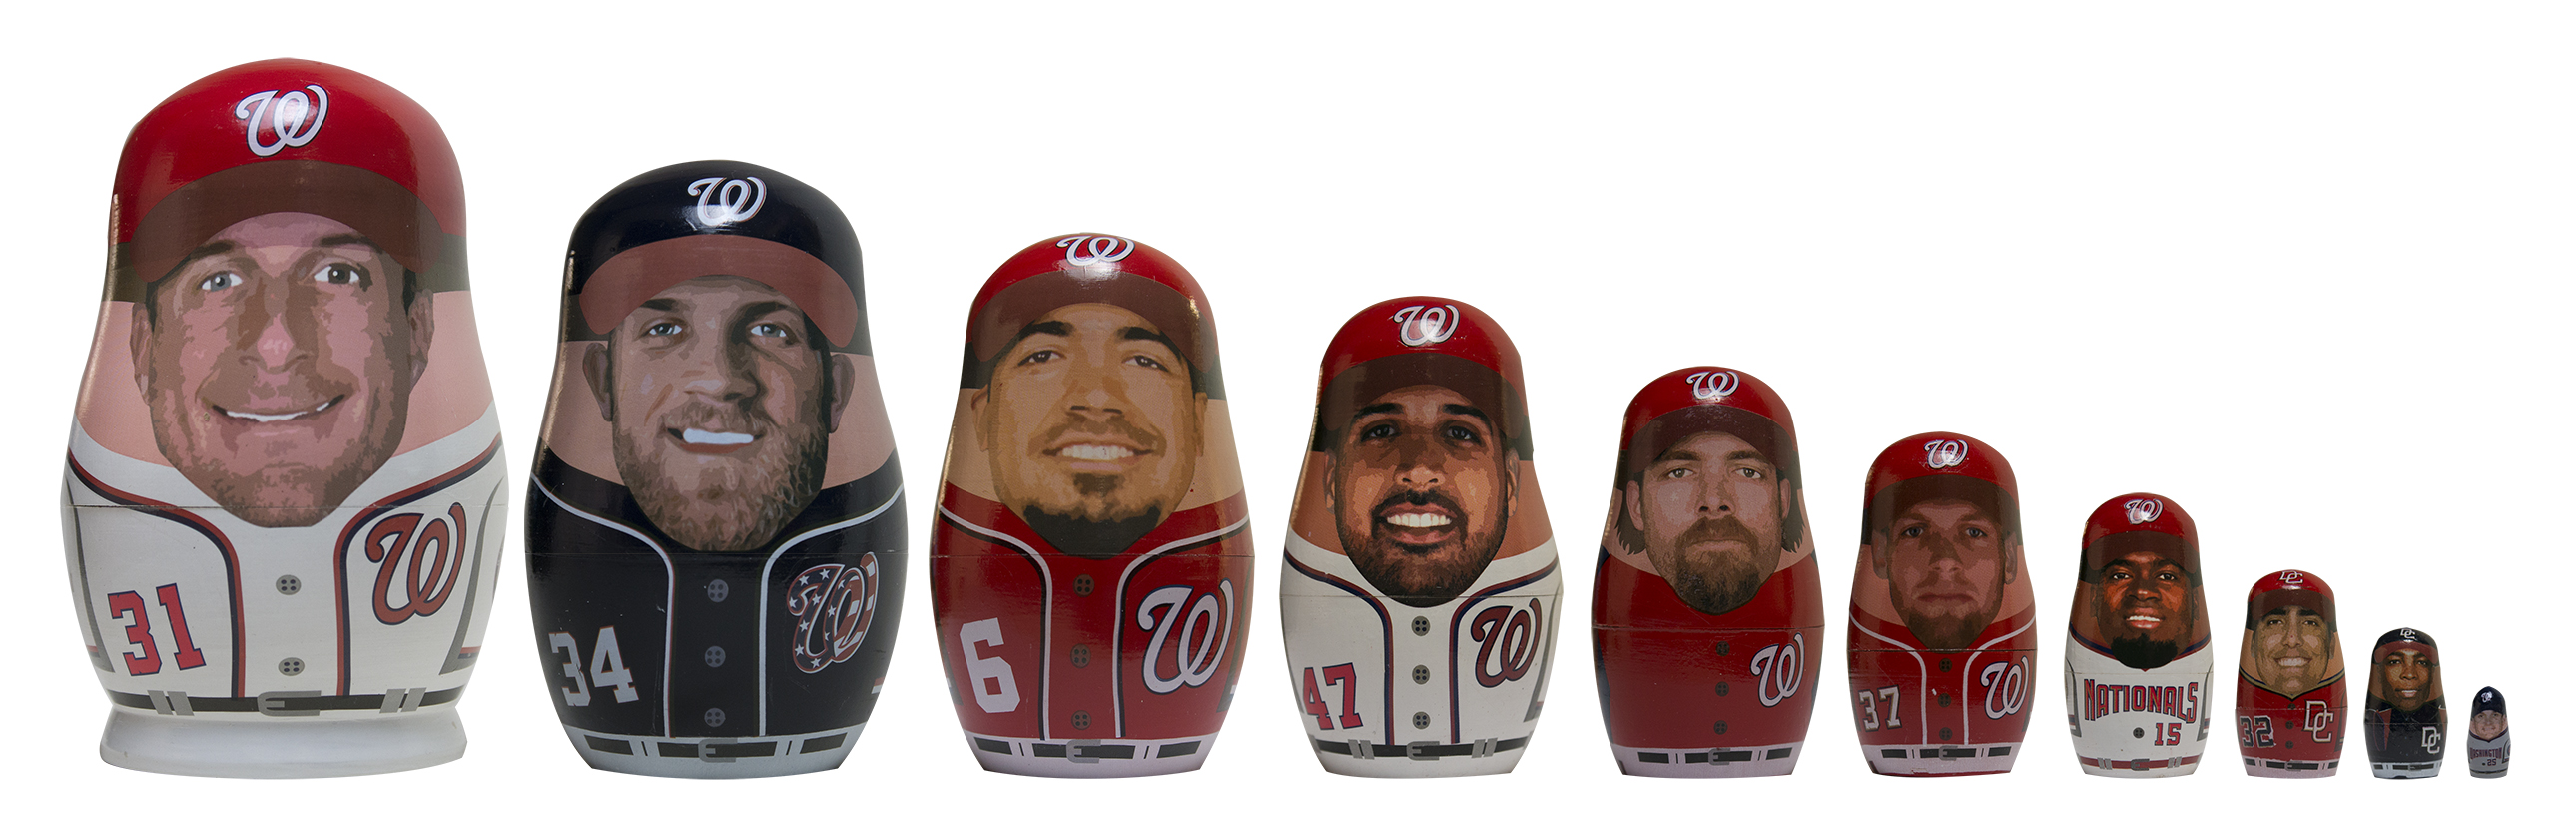 Nesting Doll Backgrounds, Compatible - PC, Mobile, Gadgets| 2580x840 px